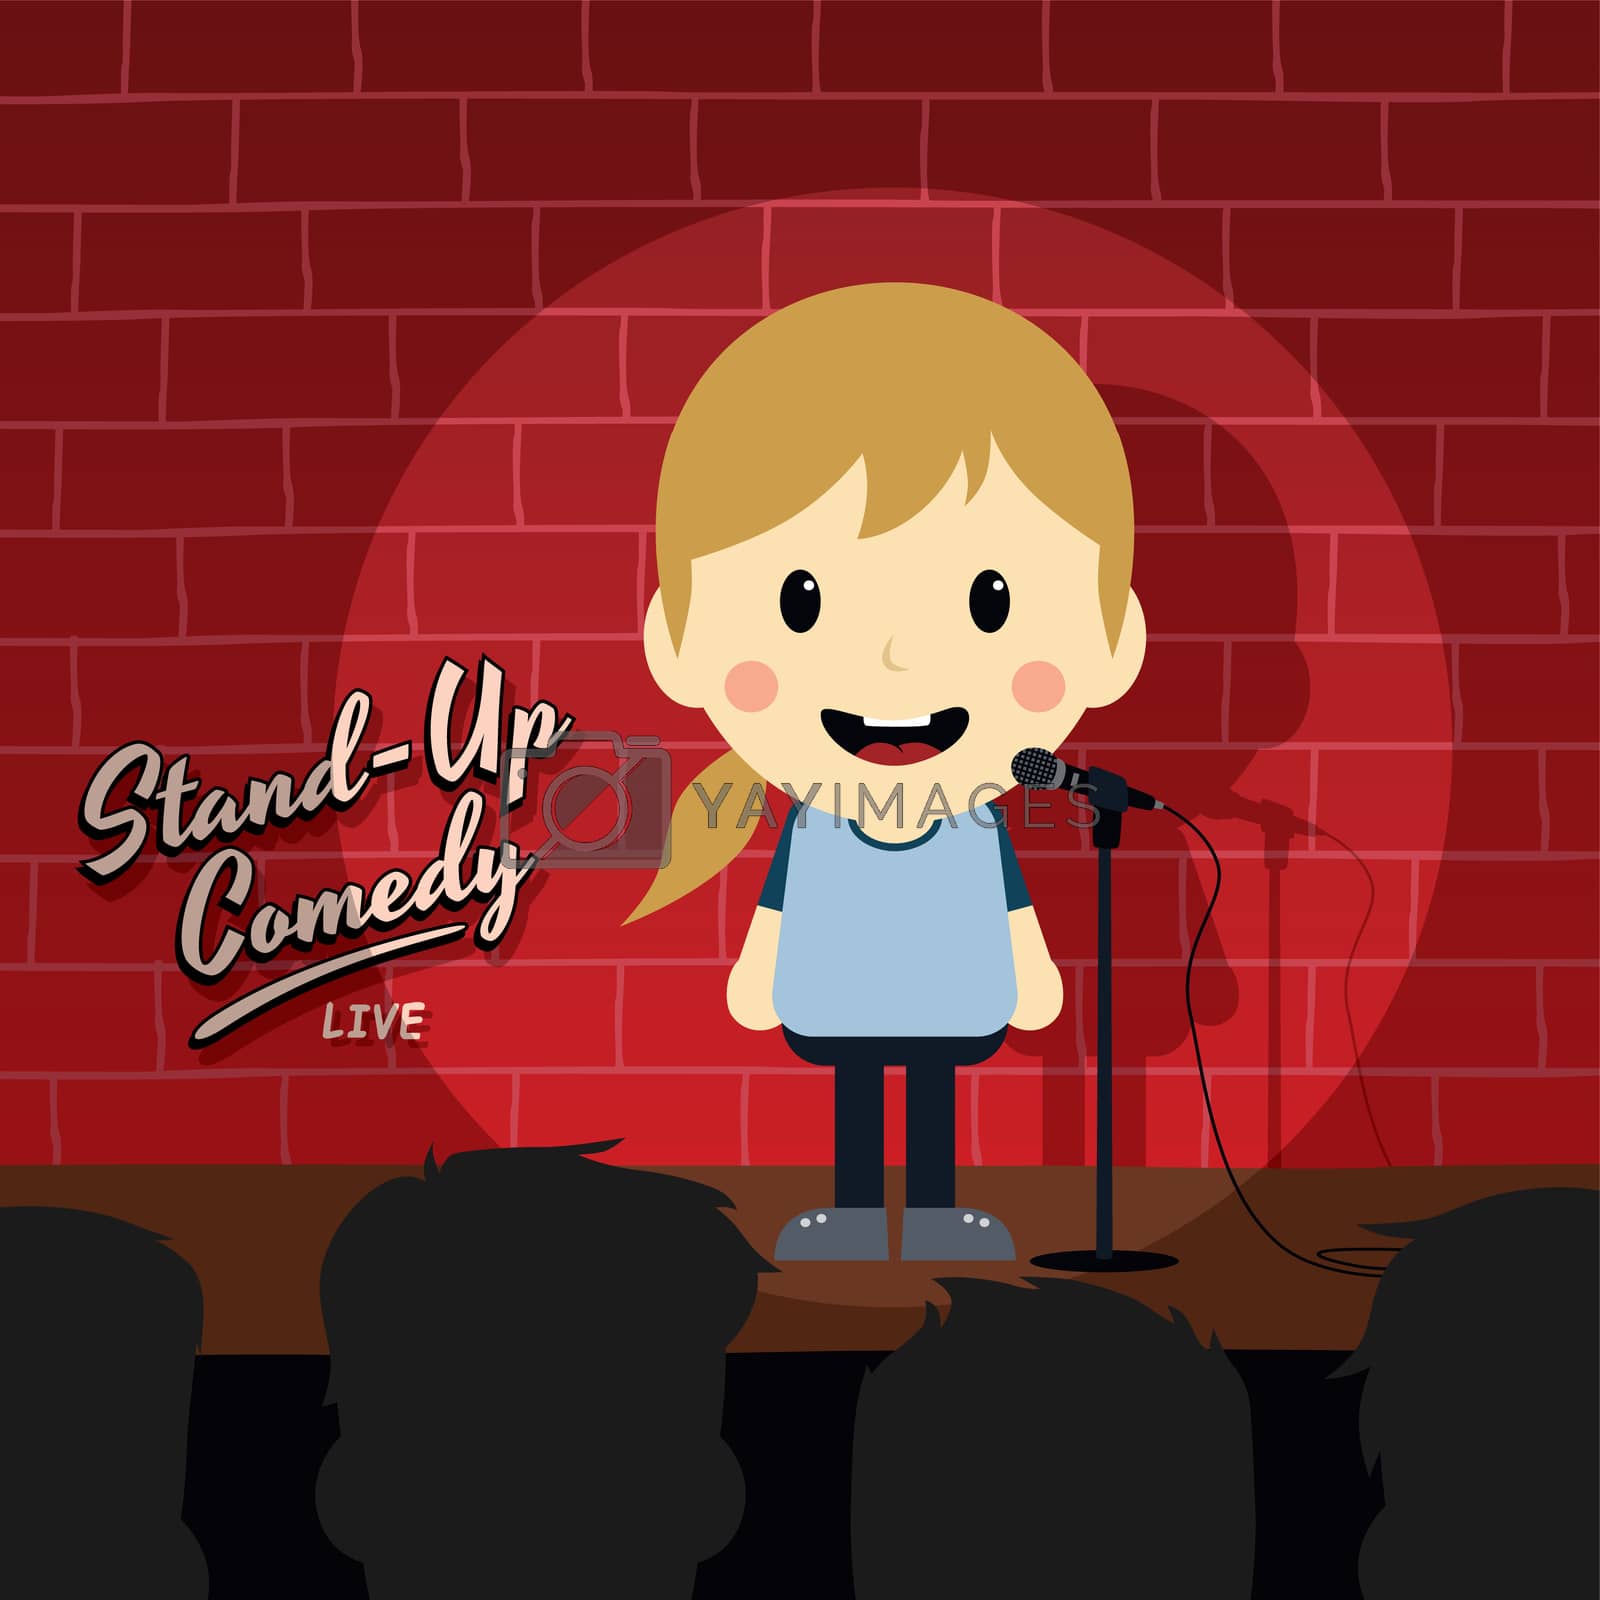 Royalty free image of stand up comedy by vector1st